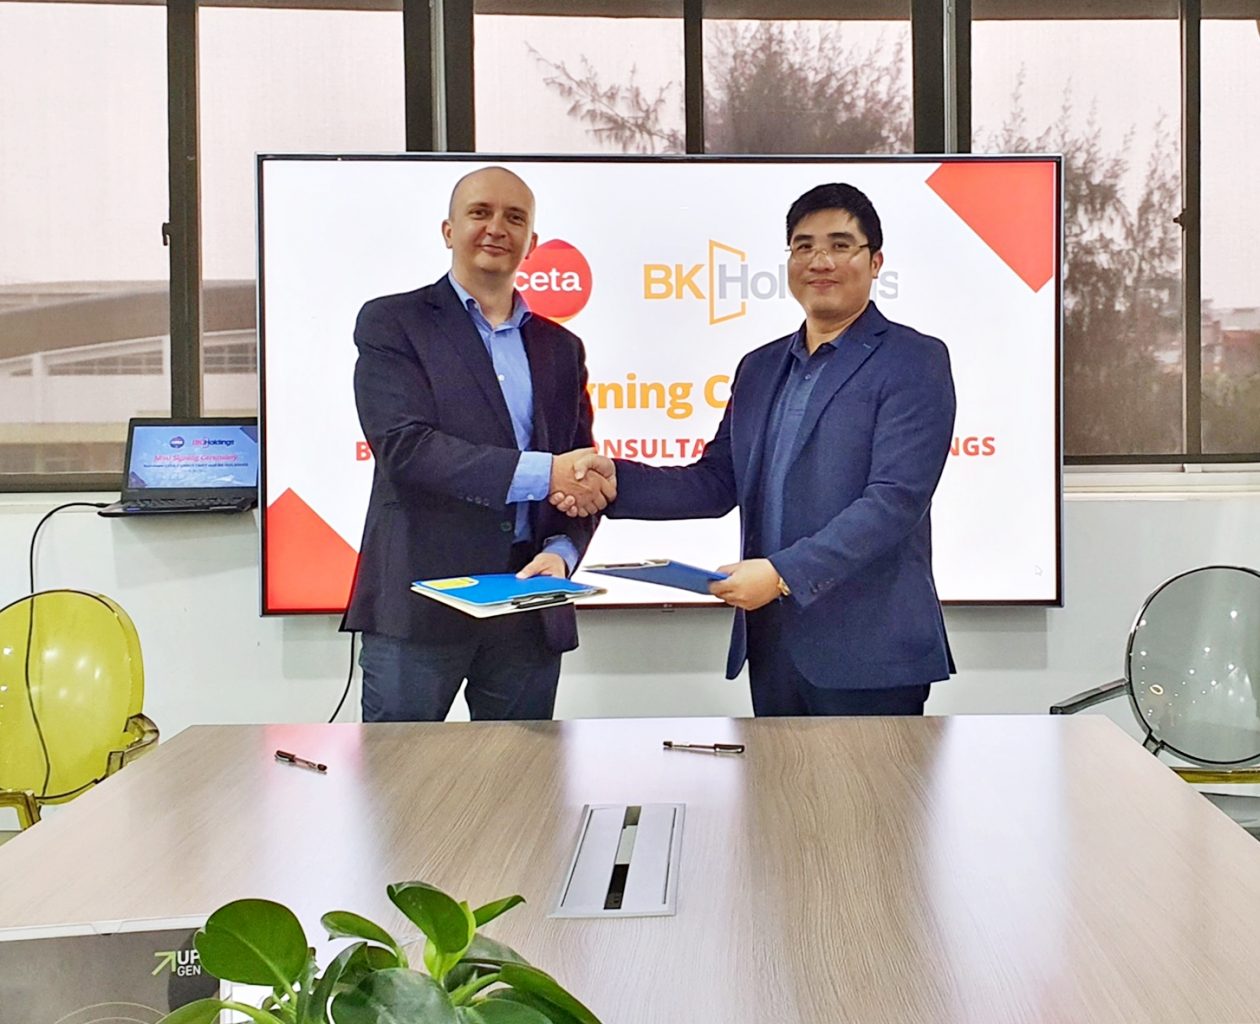 CETA Consulting and BK Holdings officially signed an MOU